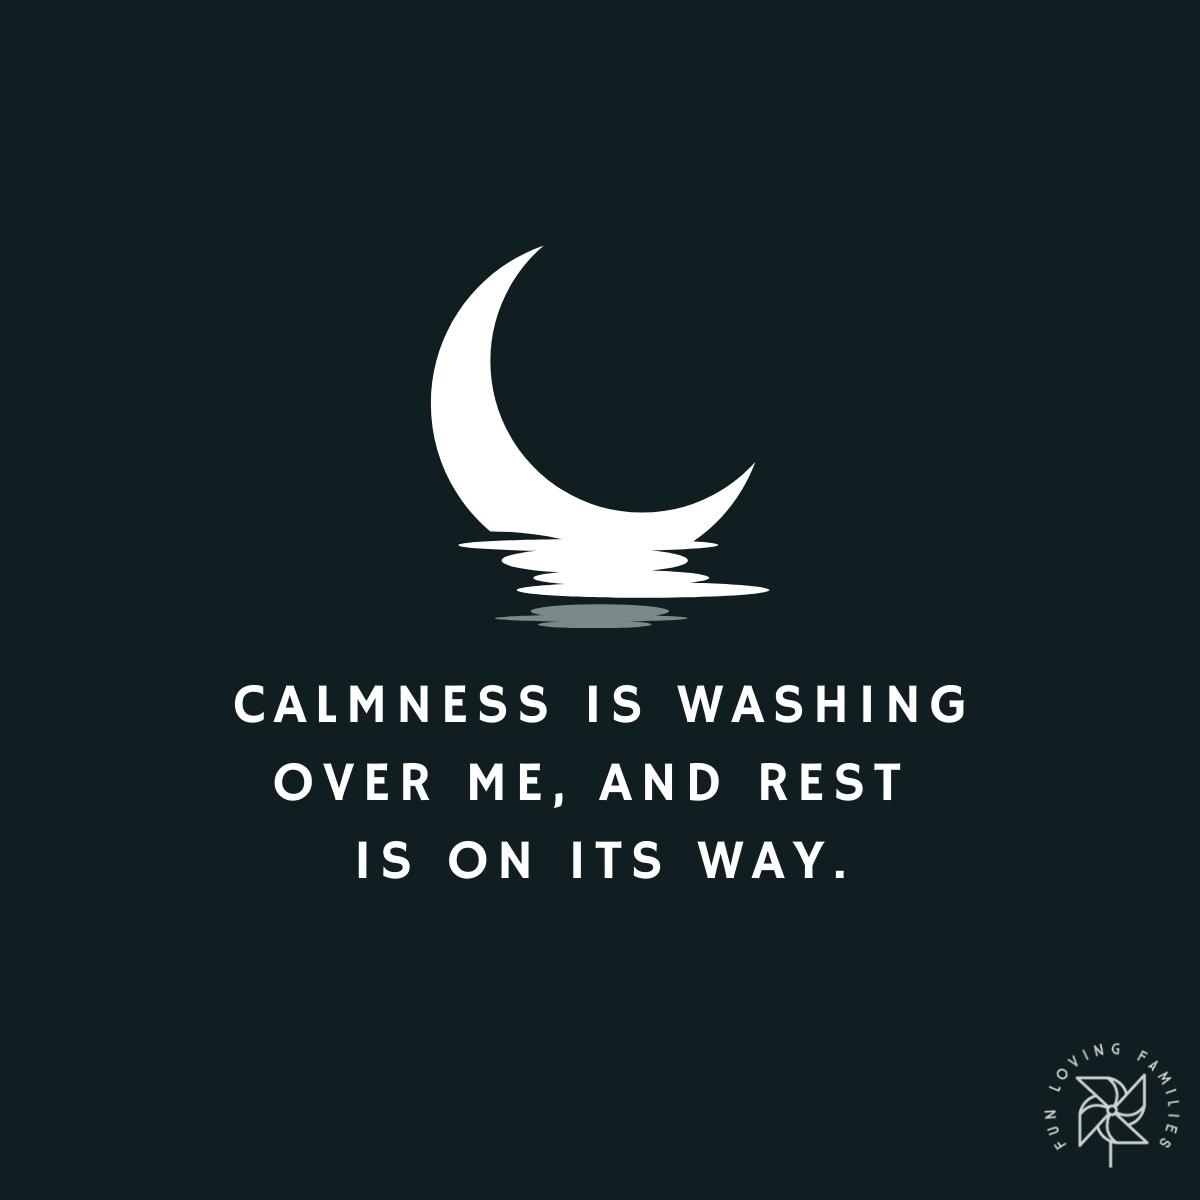 Calmness is washing over me, and rest is on its way affirmation